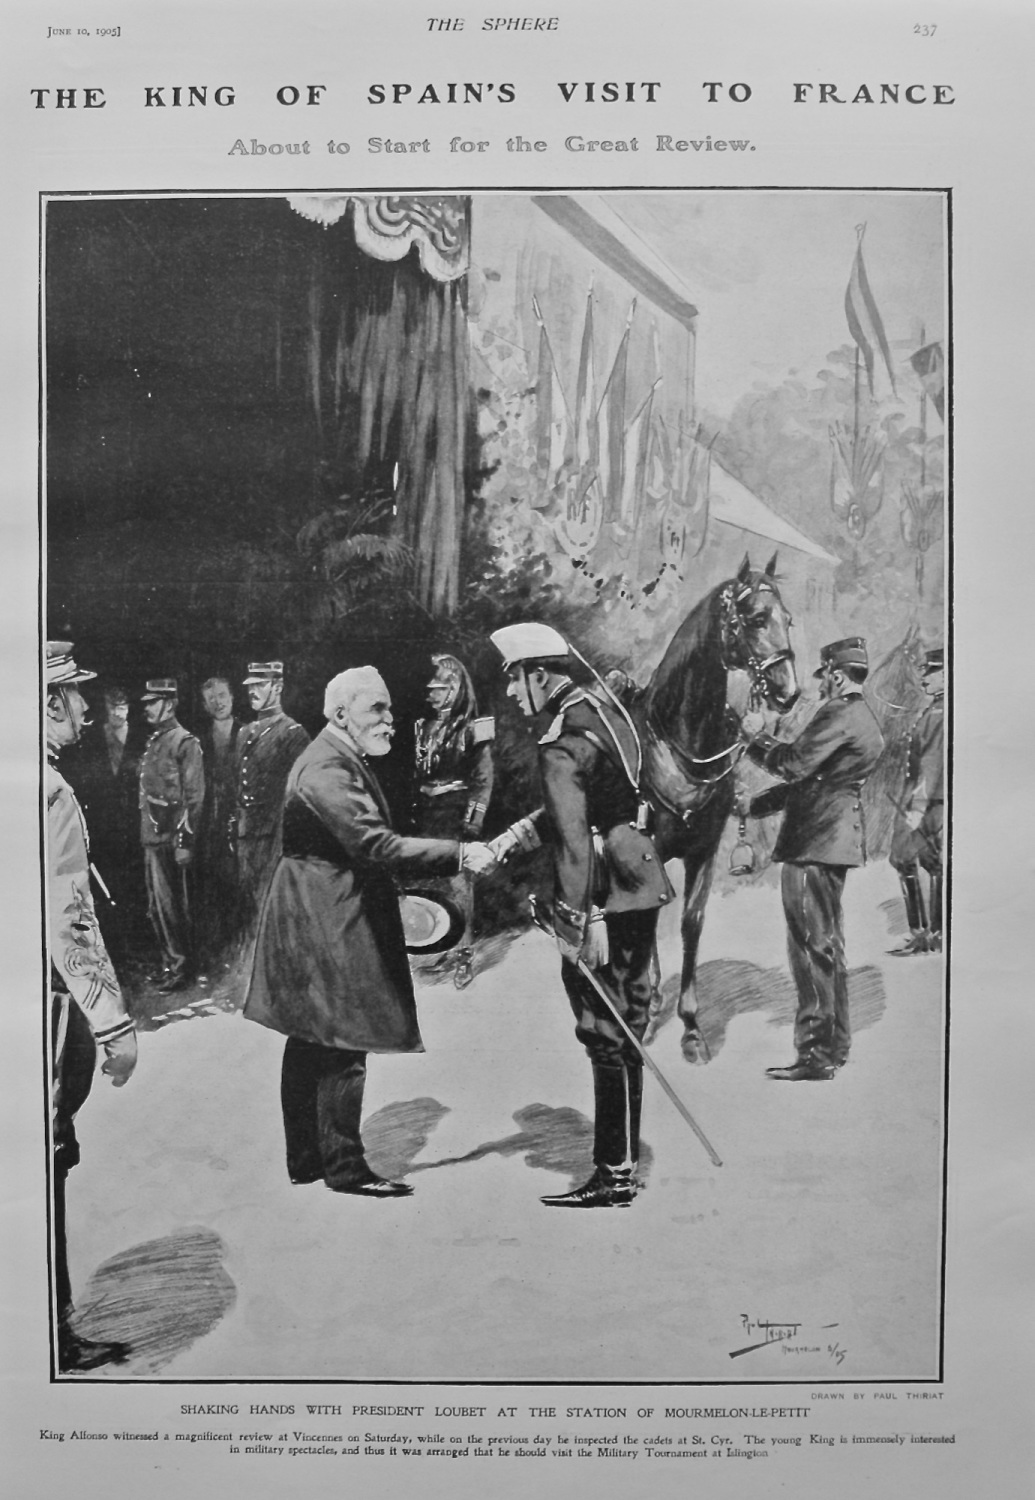 The King of Spain's Visit to France. 1905.